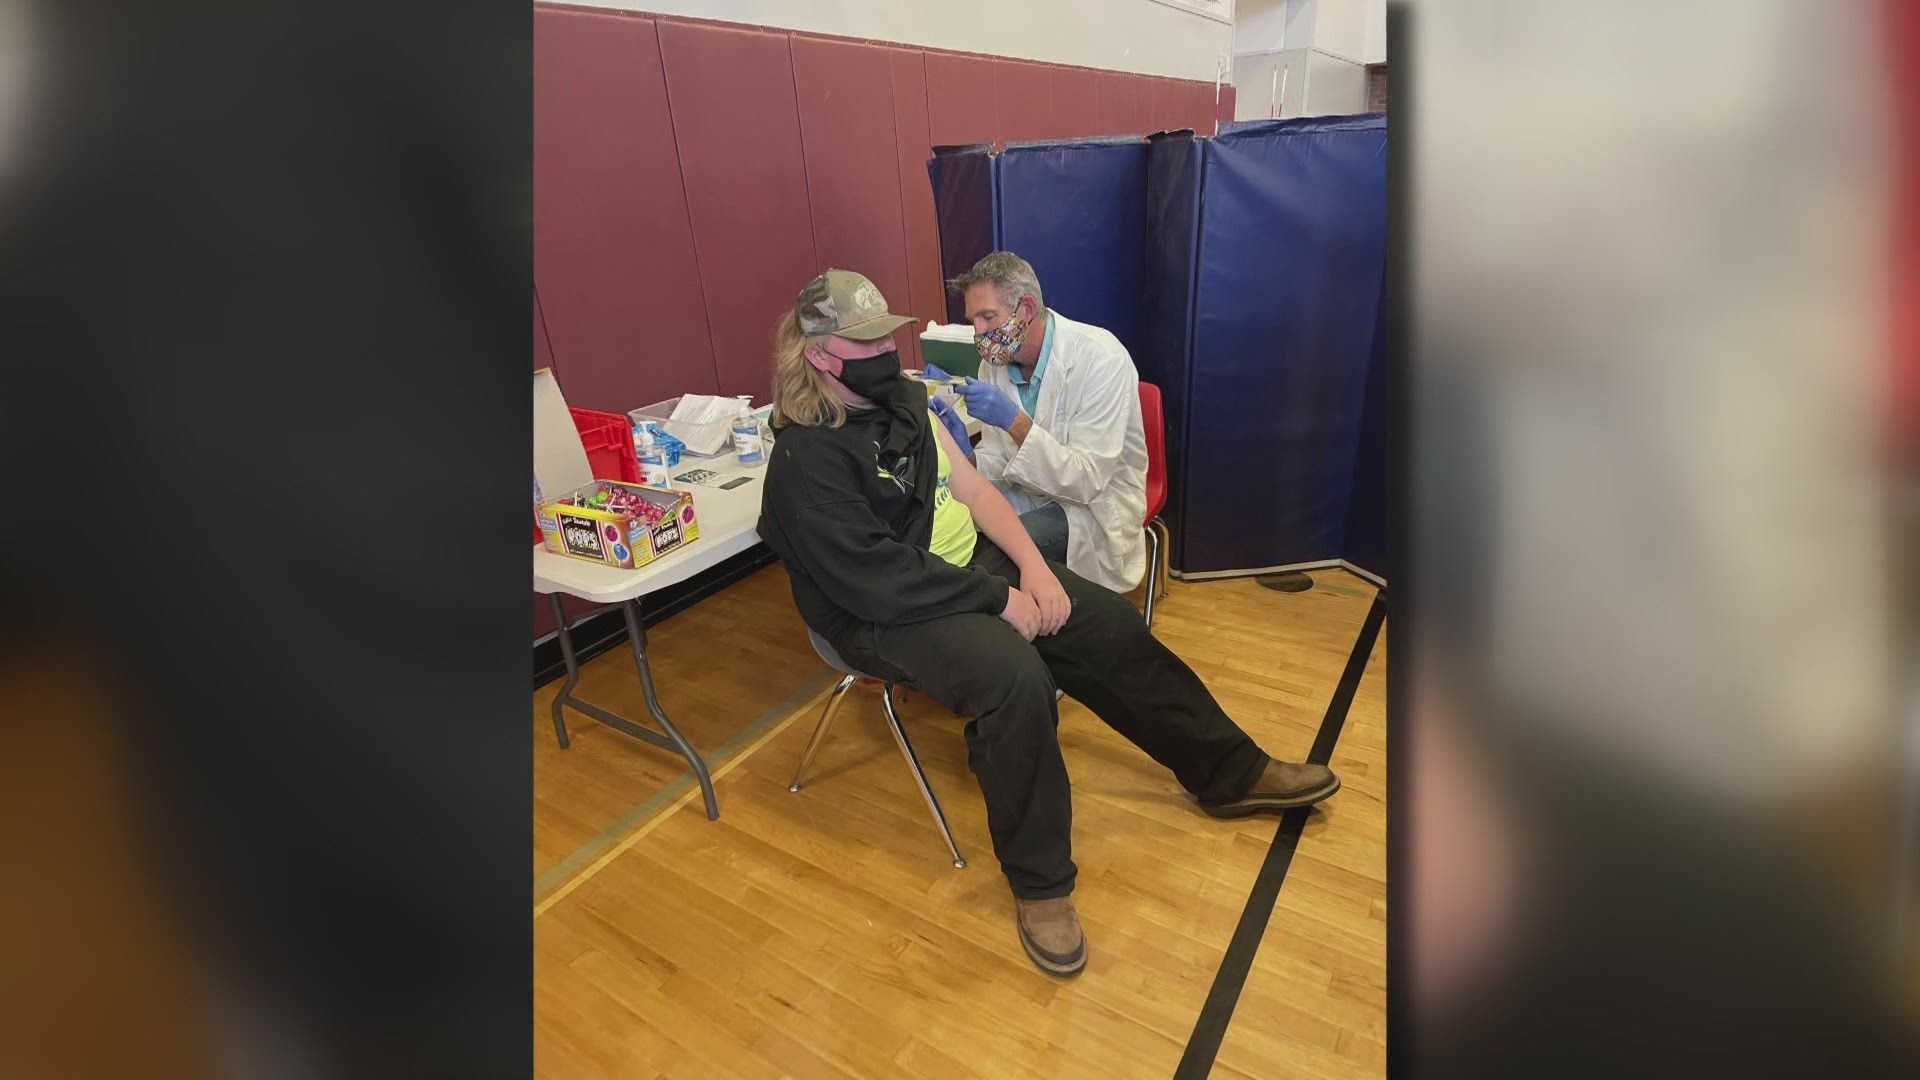 The Eatonville School District partnered with a local pharmacy to host the clinic geared toward students age 12 to 15 years old.